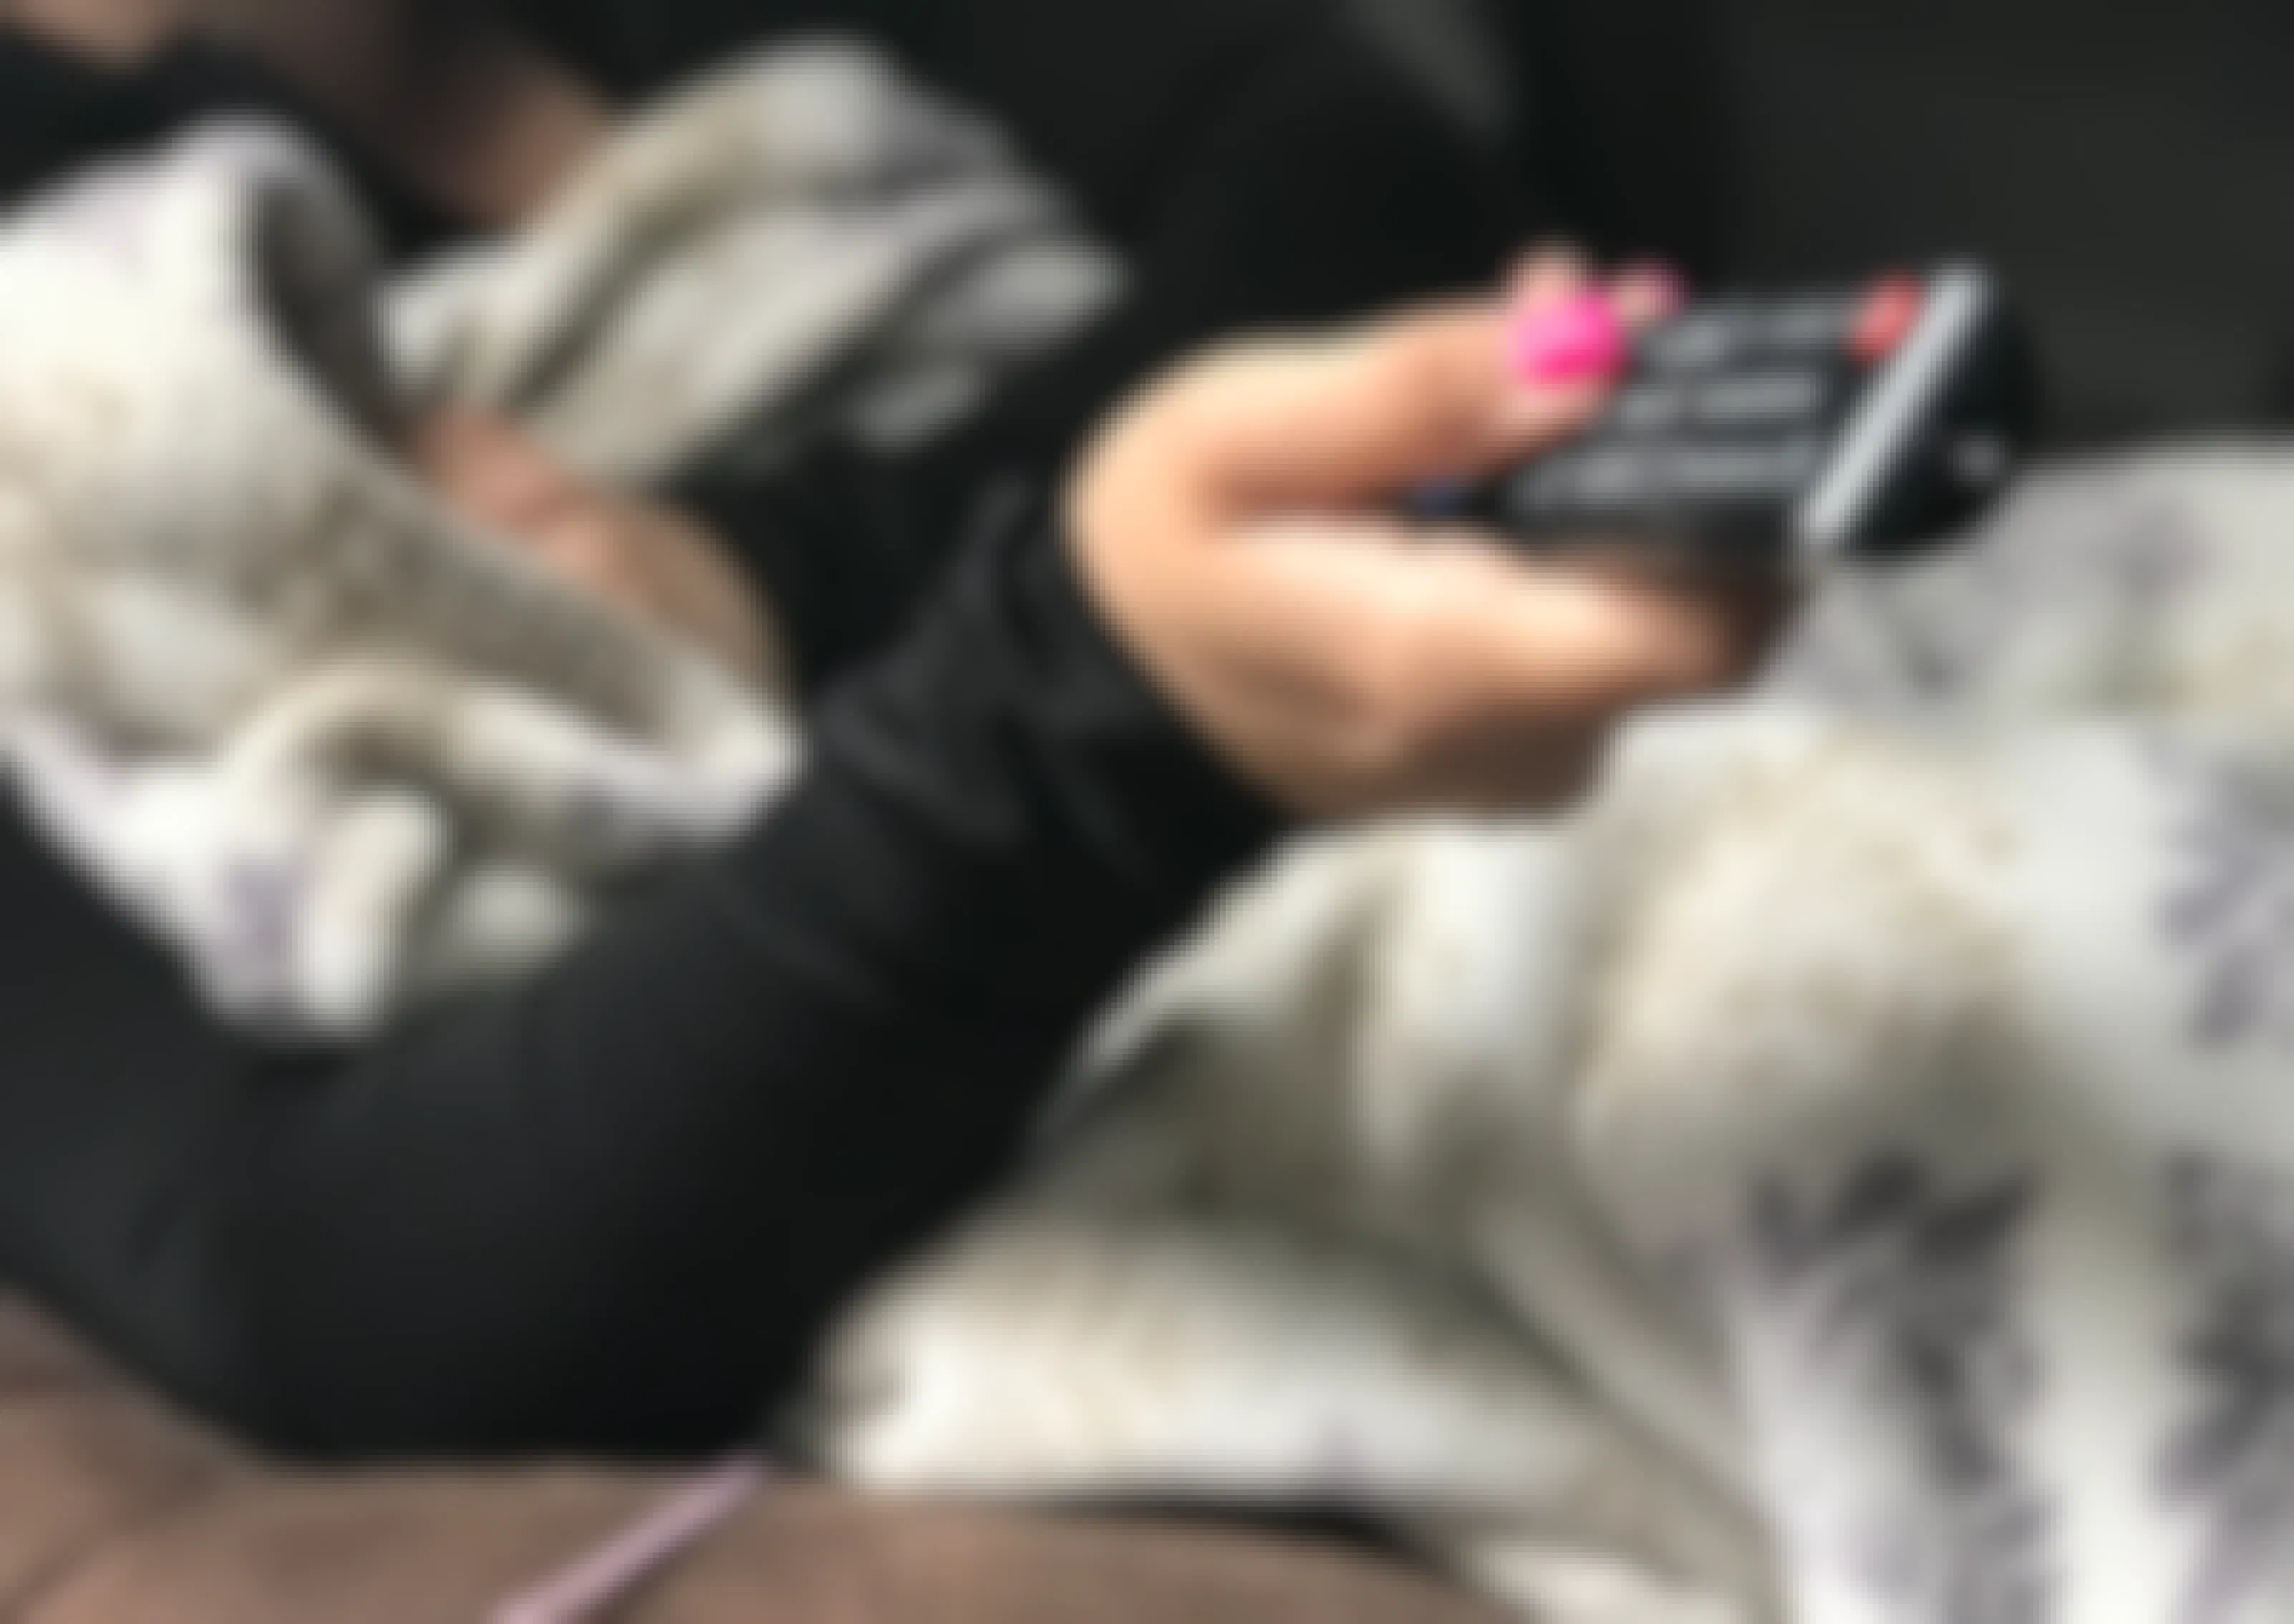 woman with blanket on couch channel surfing with remote